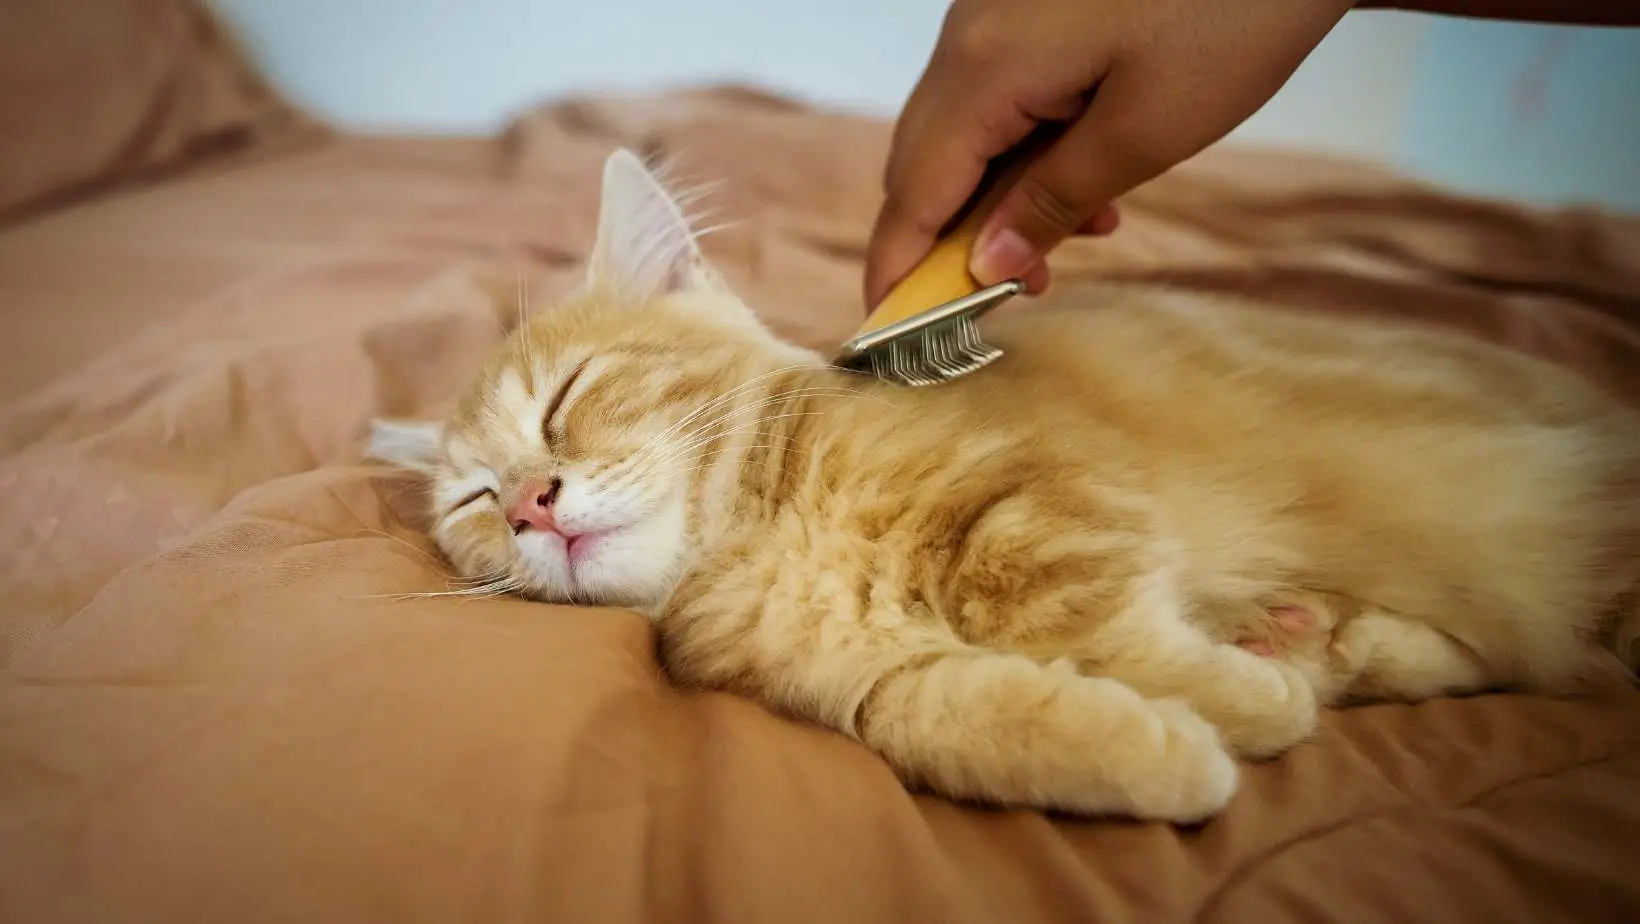 How to Sedate Cat for Grooming?